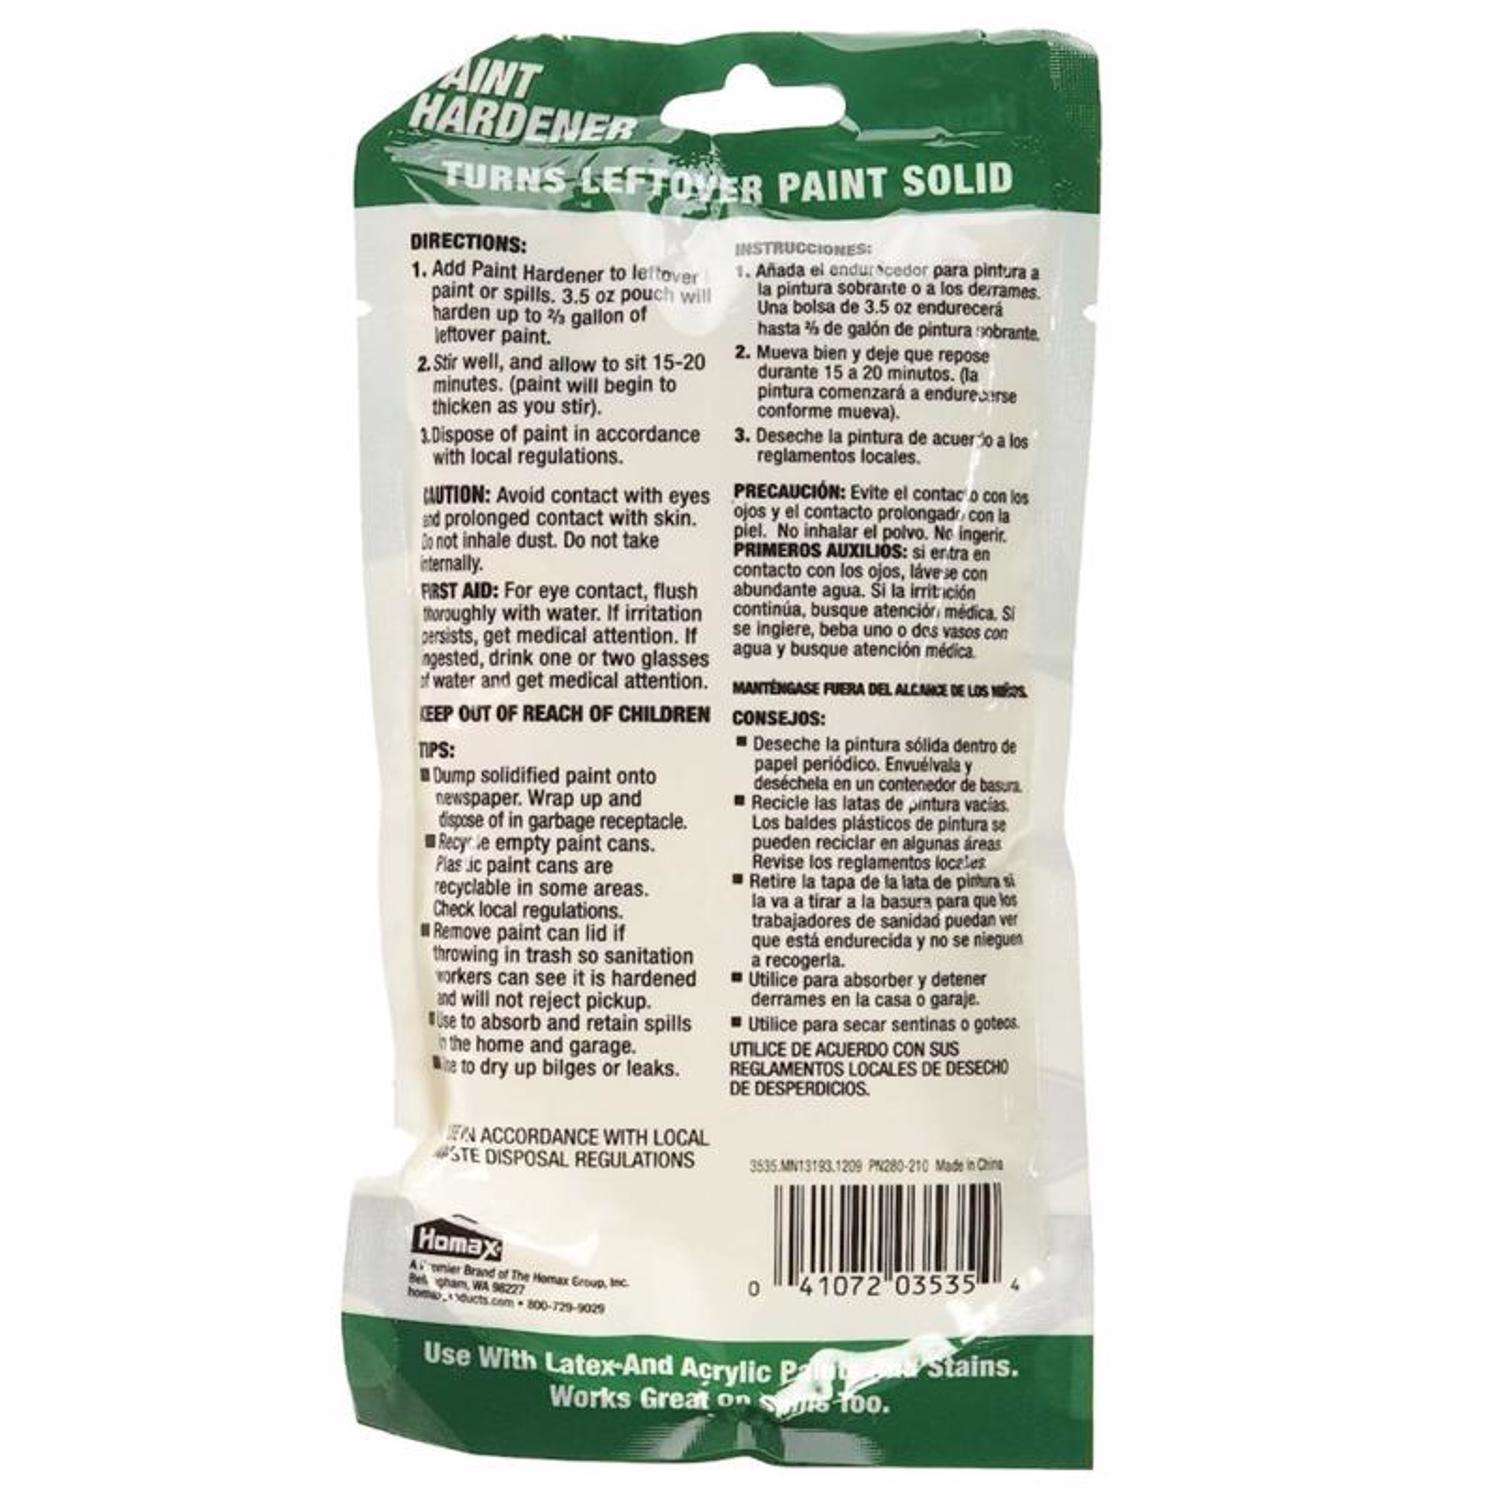 Homax 3-Pack Paint Hardener, Fast Acting Paint Solidifier, #3535, 3.5oz Each